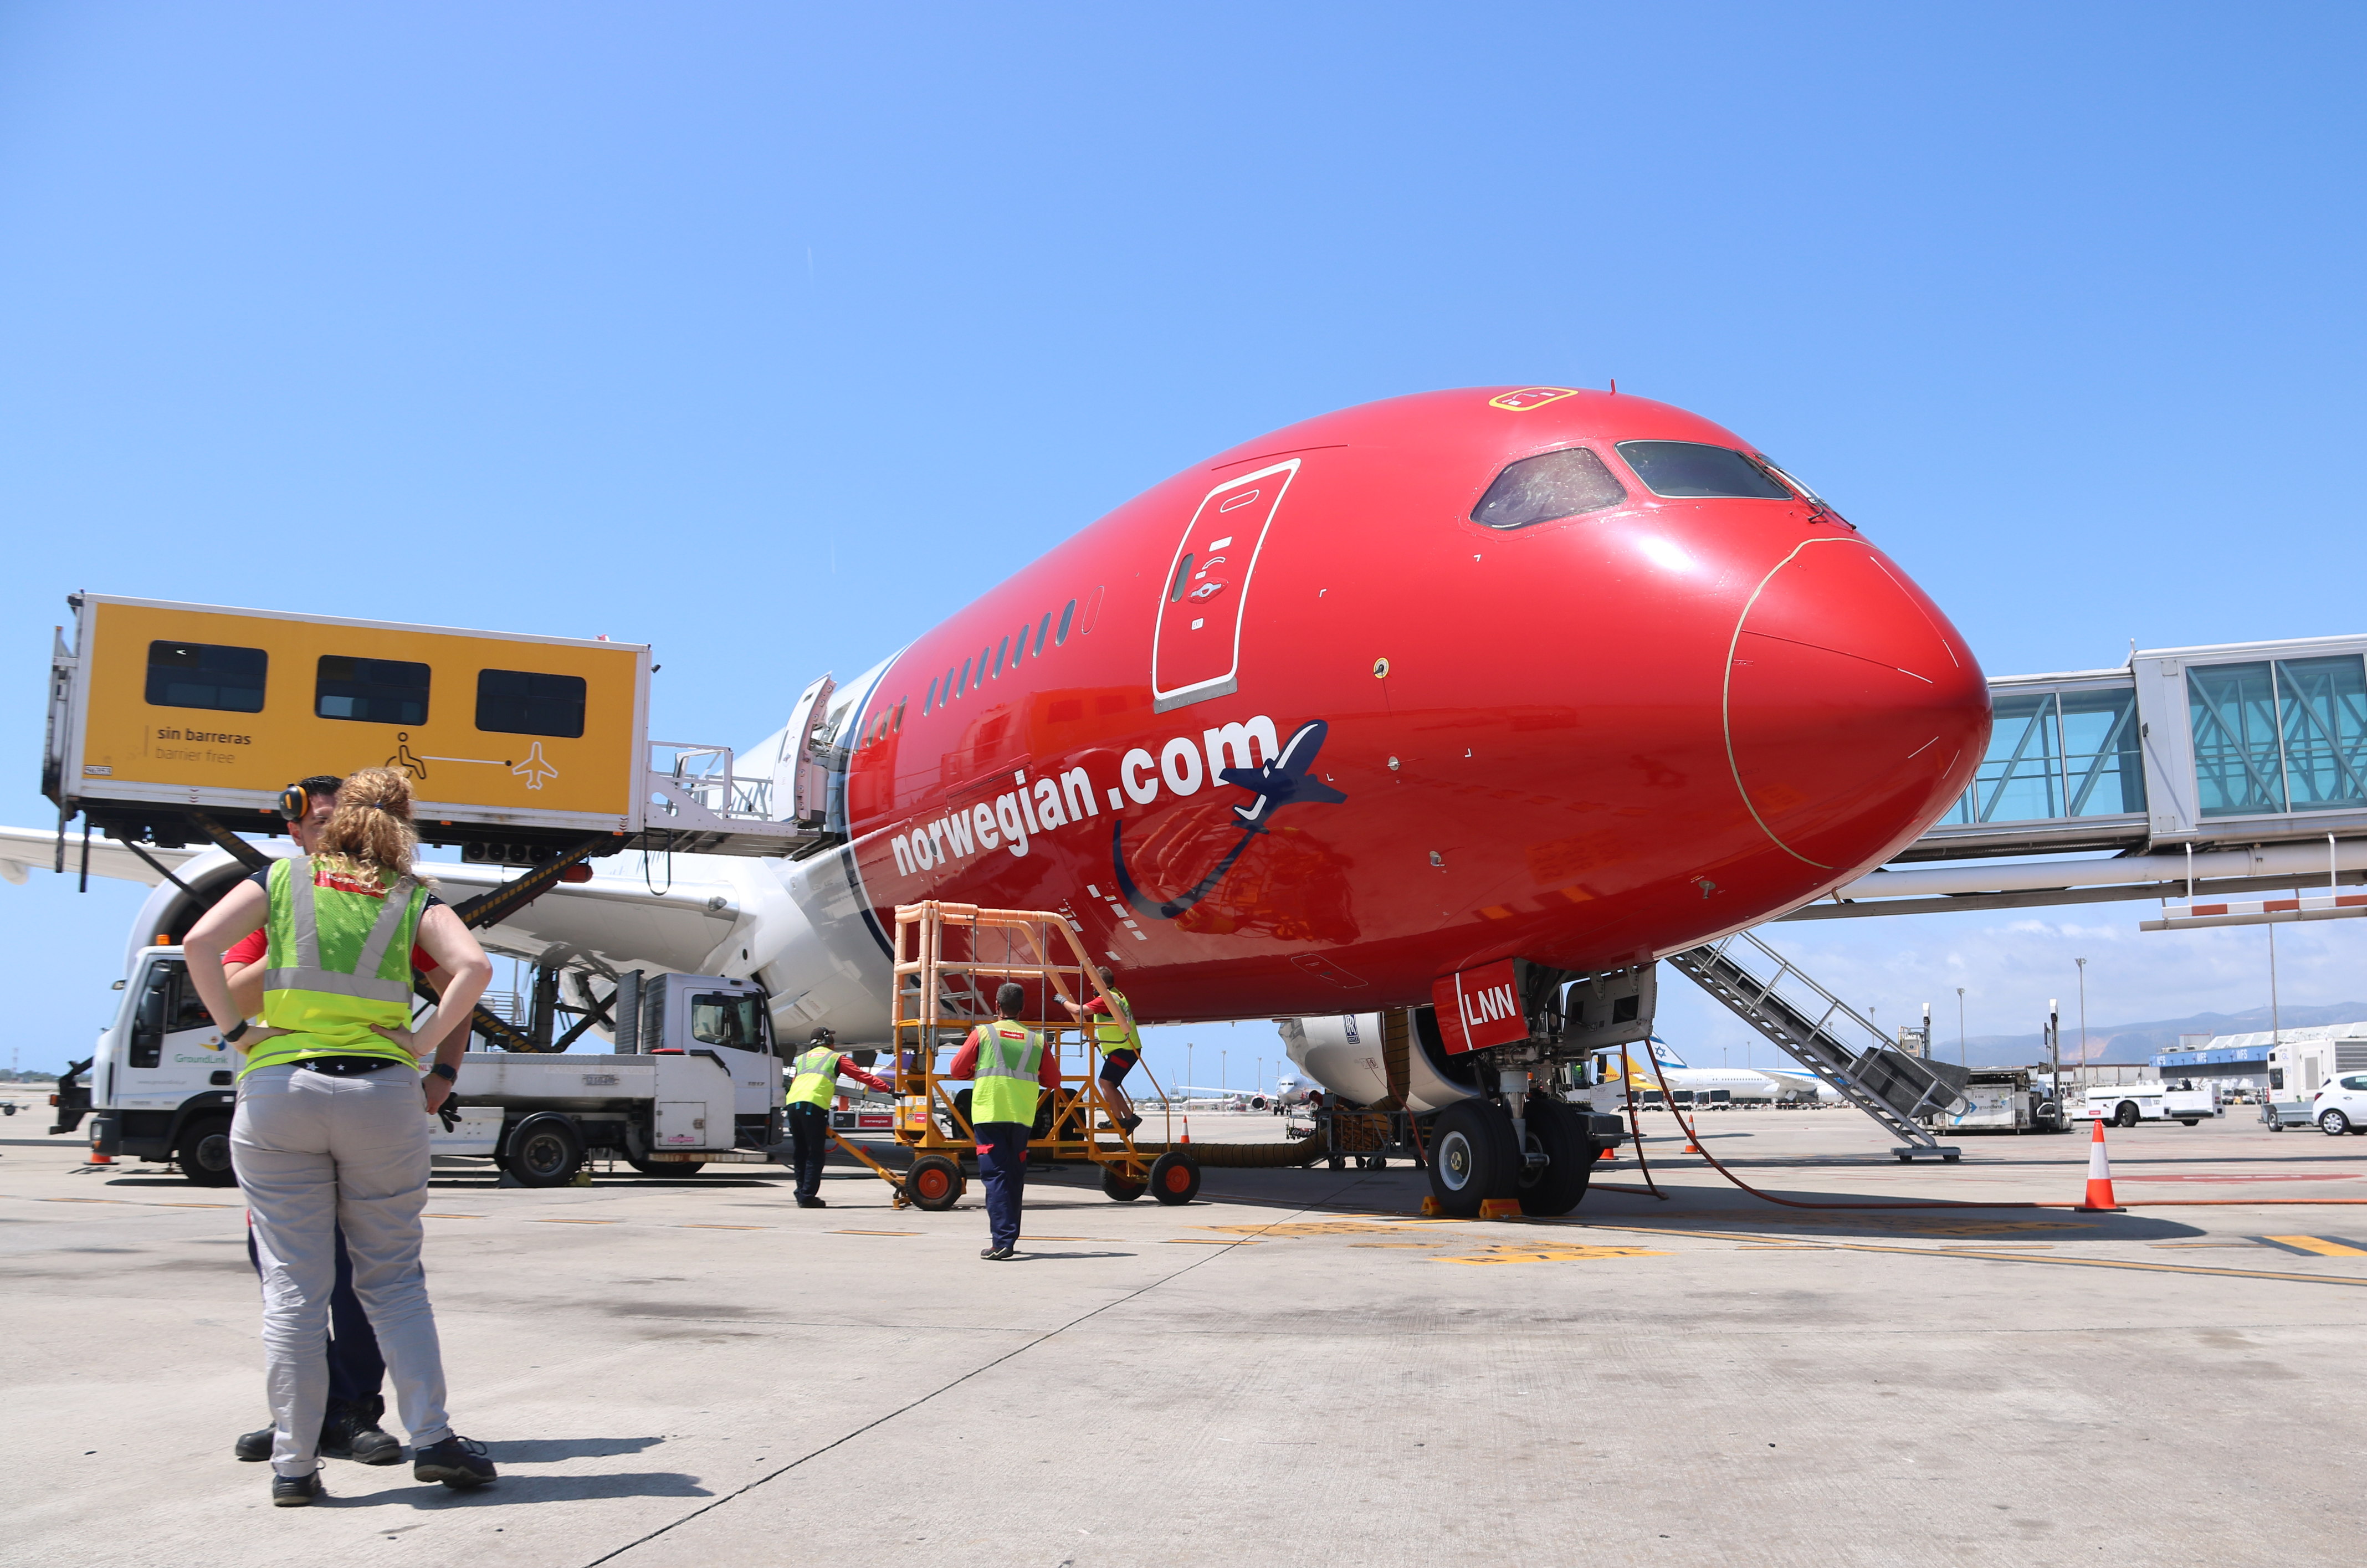 Norwegian Airline's first Barcelona-Chicago flight awaits take off on June 7 (Aina Martí/ACN)